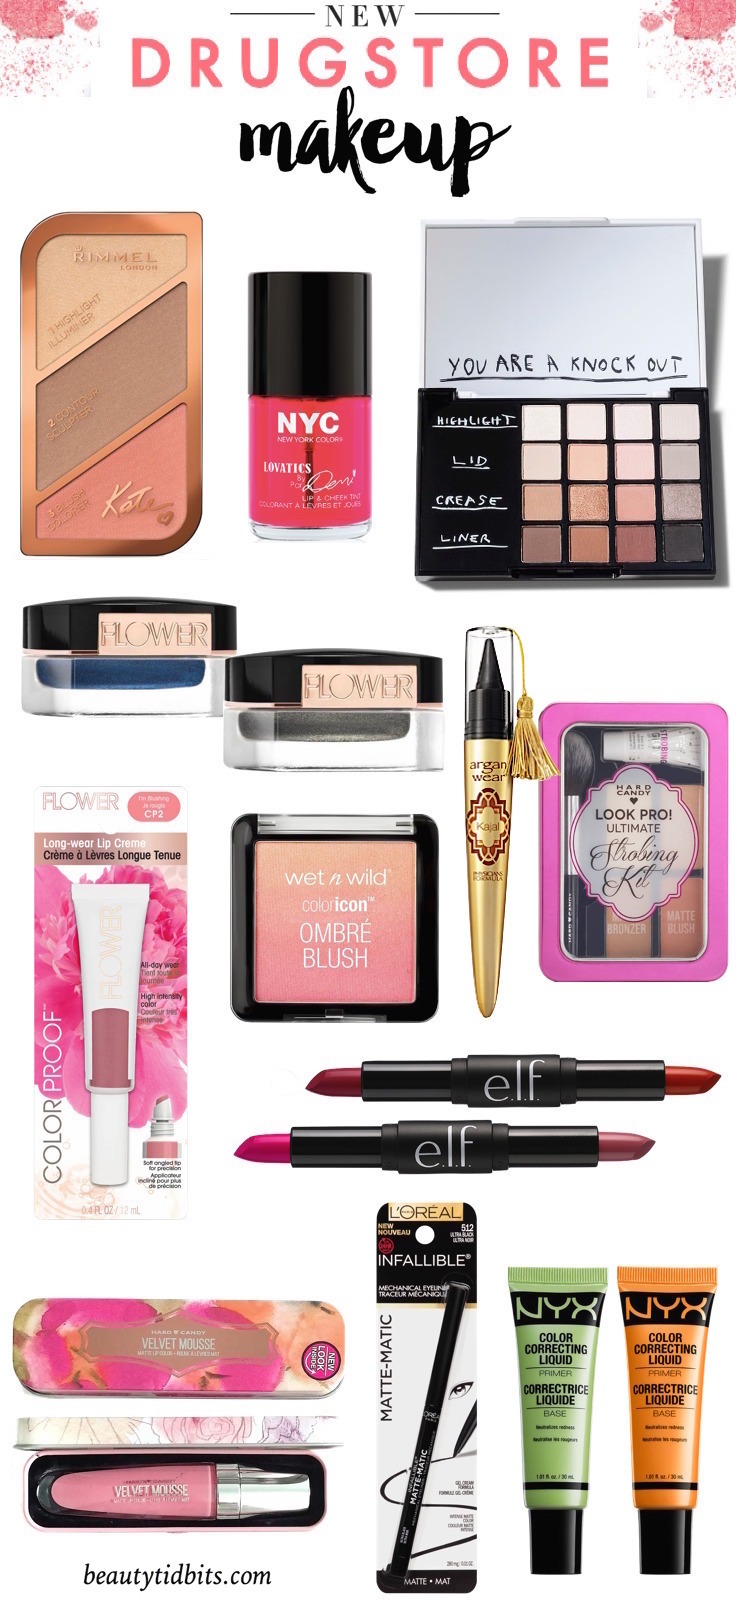  Here’s a little taste of what’s new in drugstore makeup! You're going to want to get your hands on most, if not all, of these new beauty products.